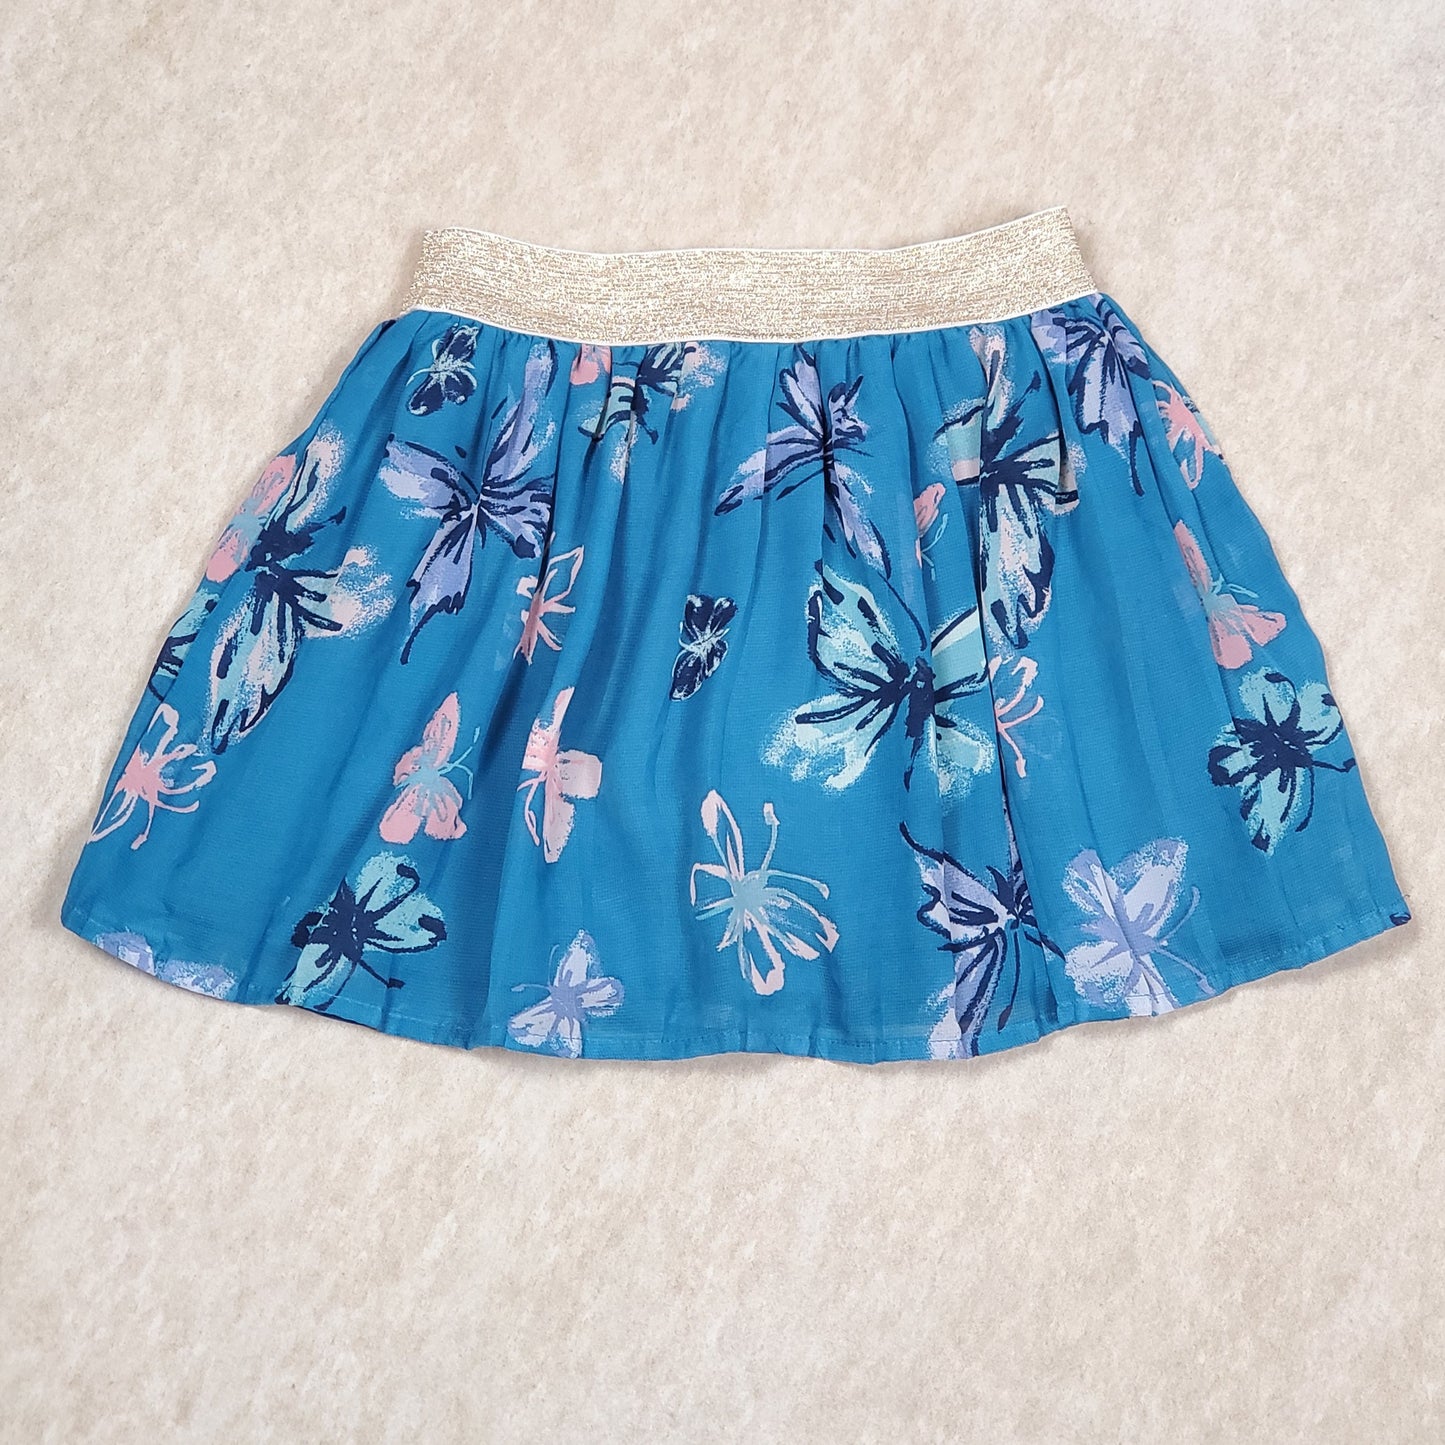 Sonoma Girls Teal Butterfly Tulle Skort Size 5 Used View 3